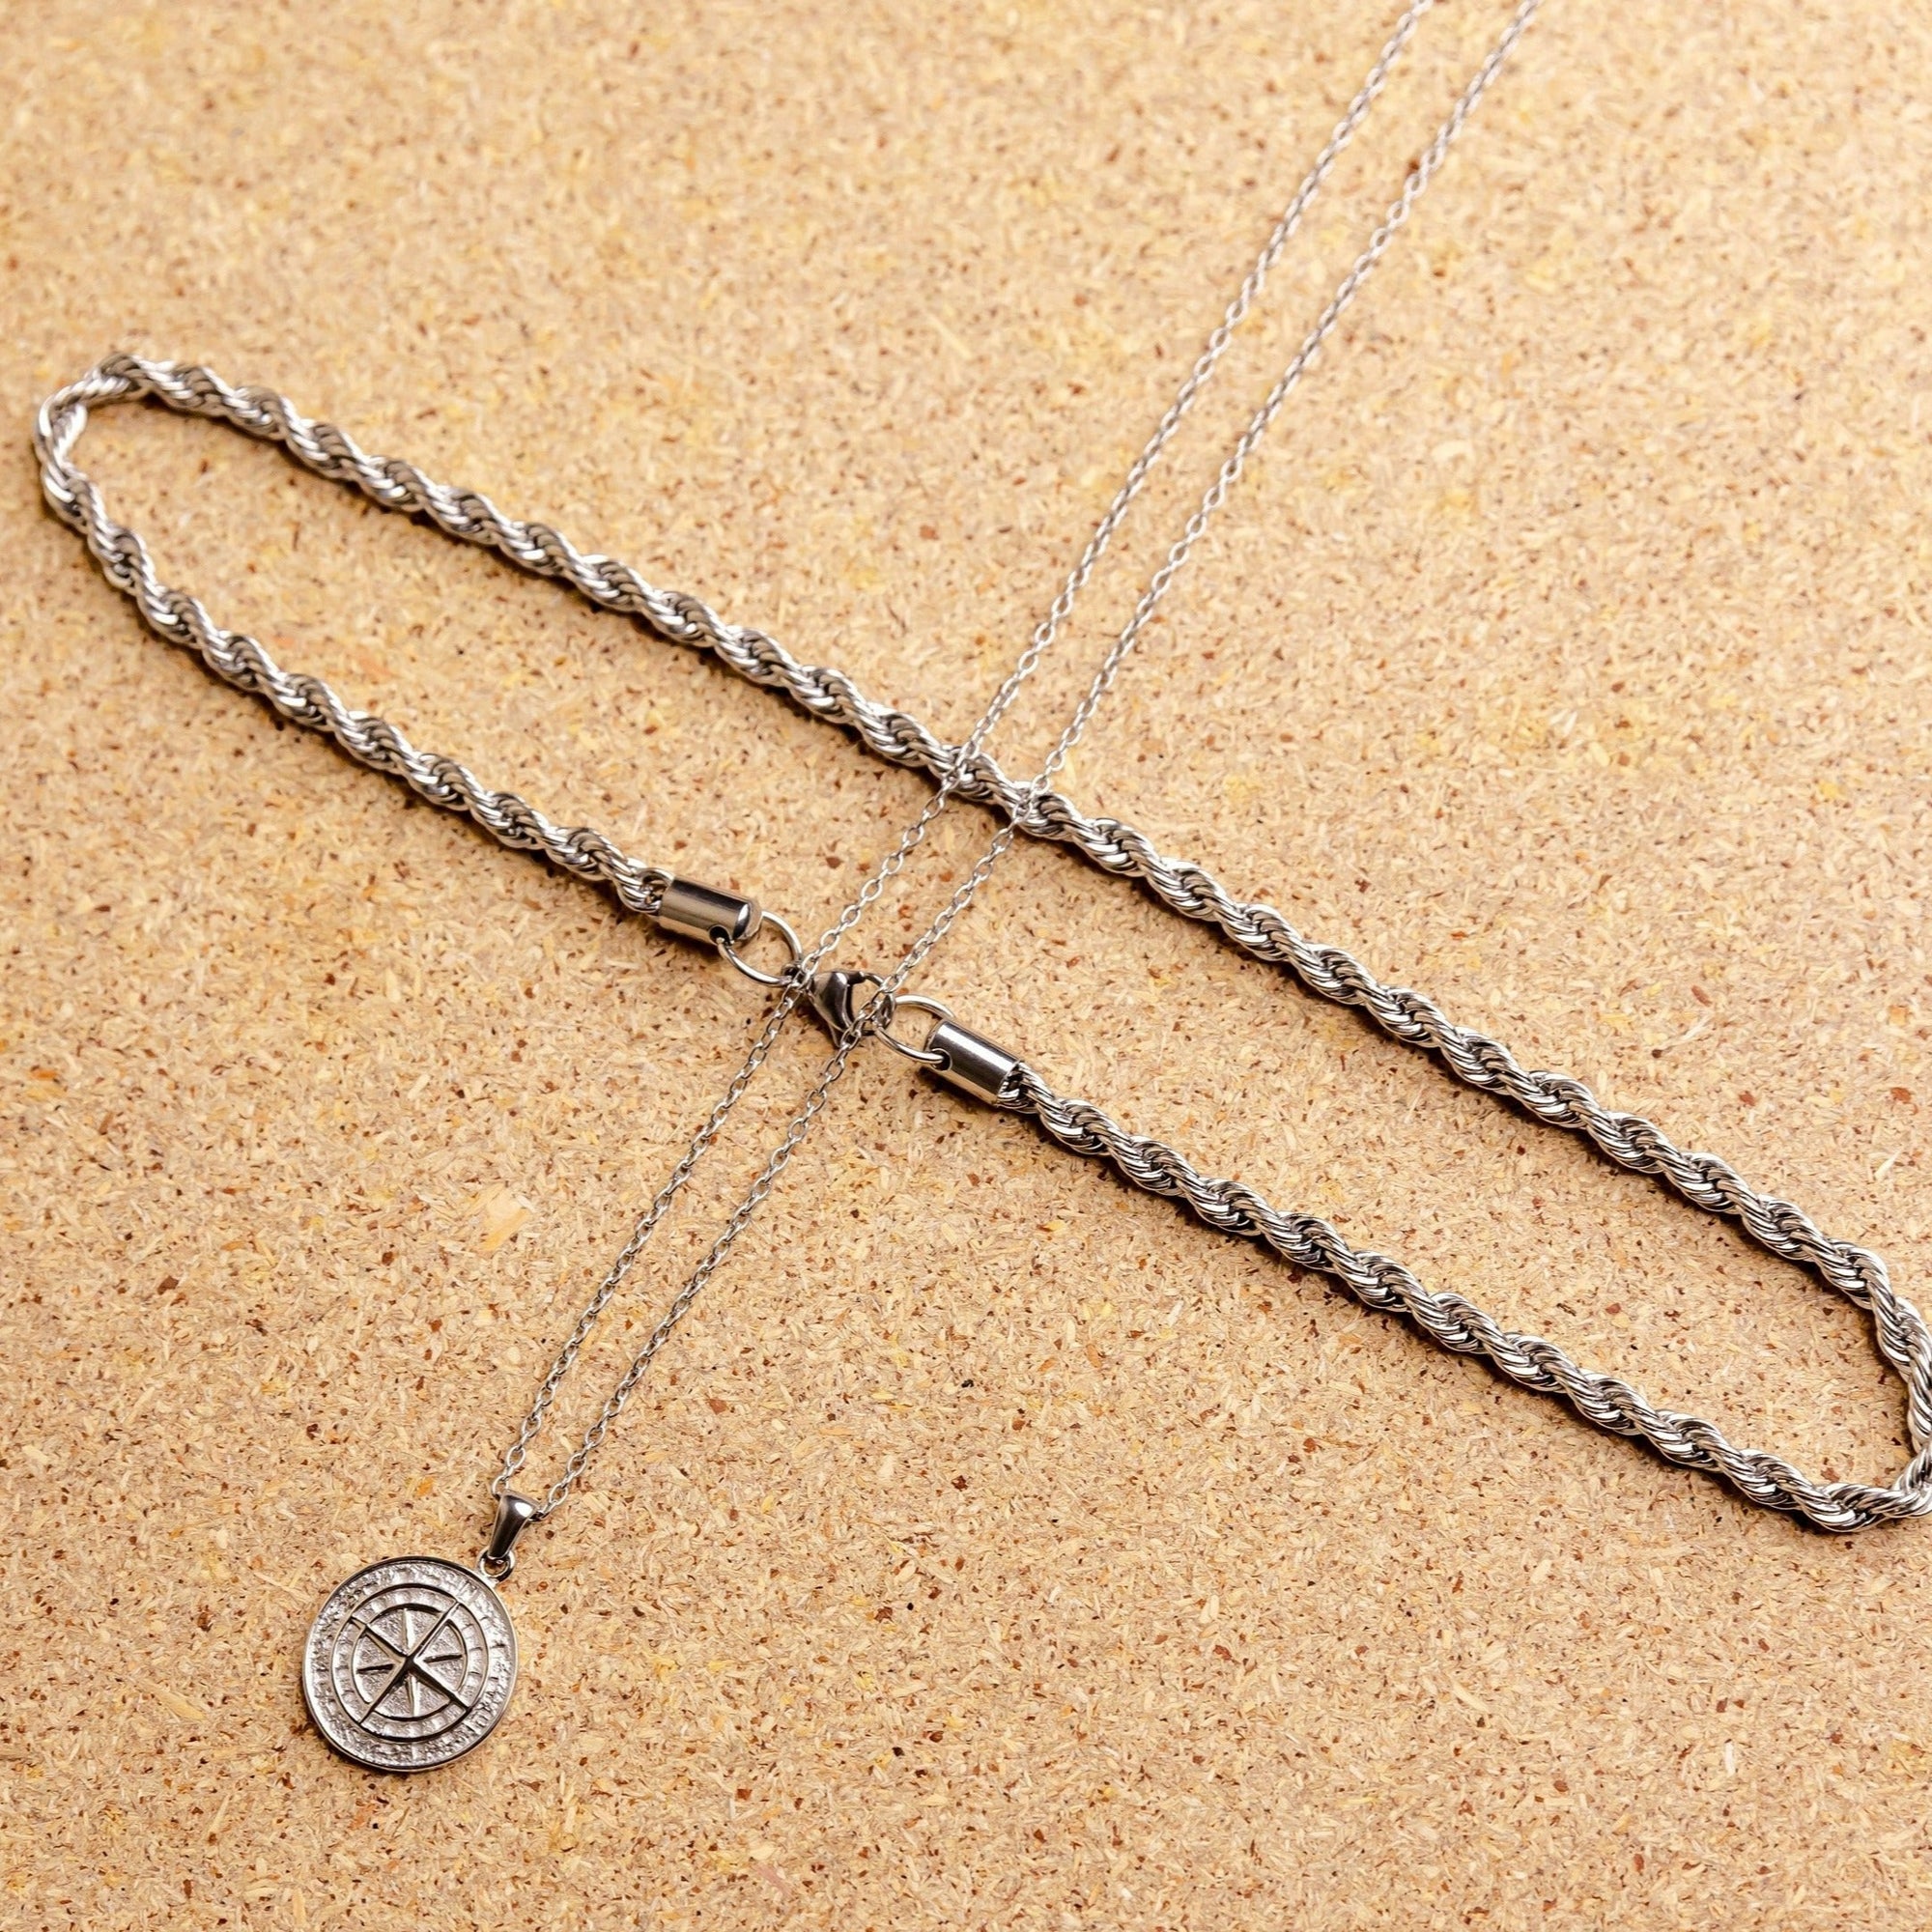 Compass Necklace Set (White Gold)